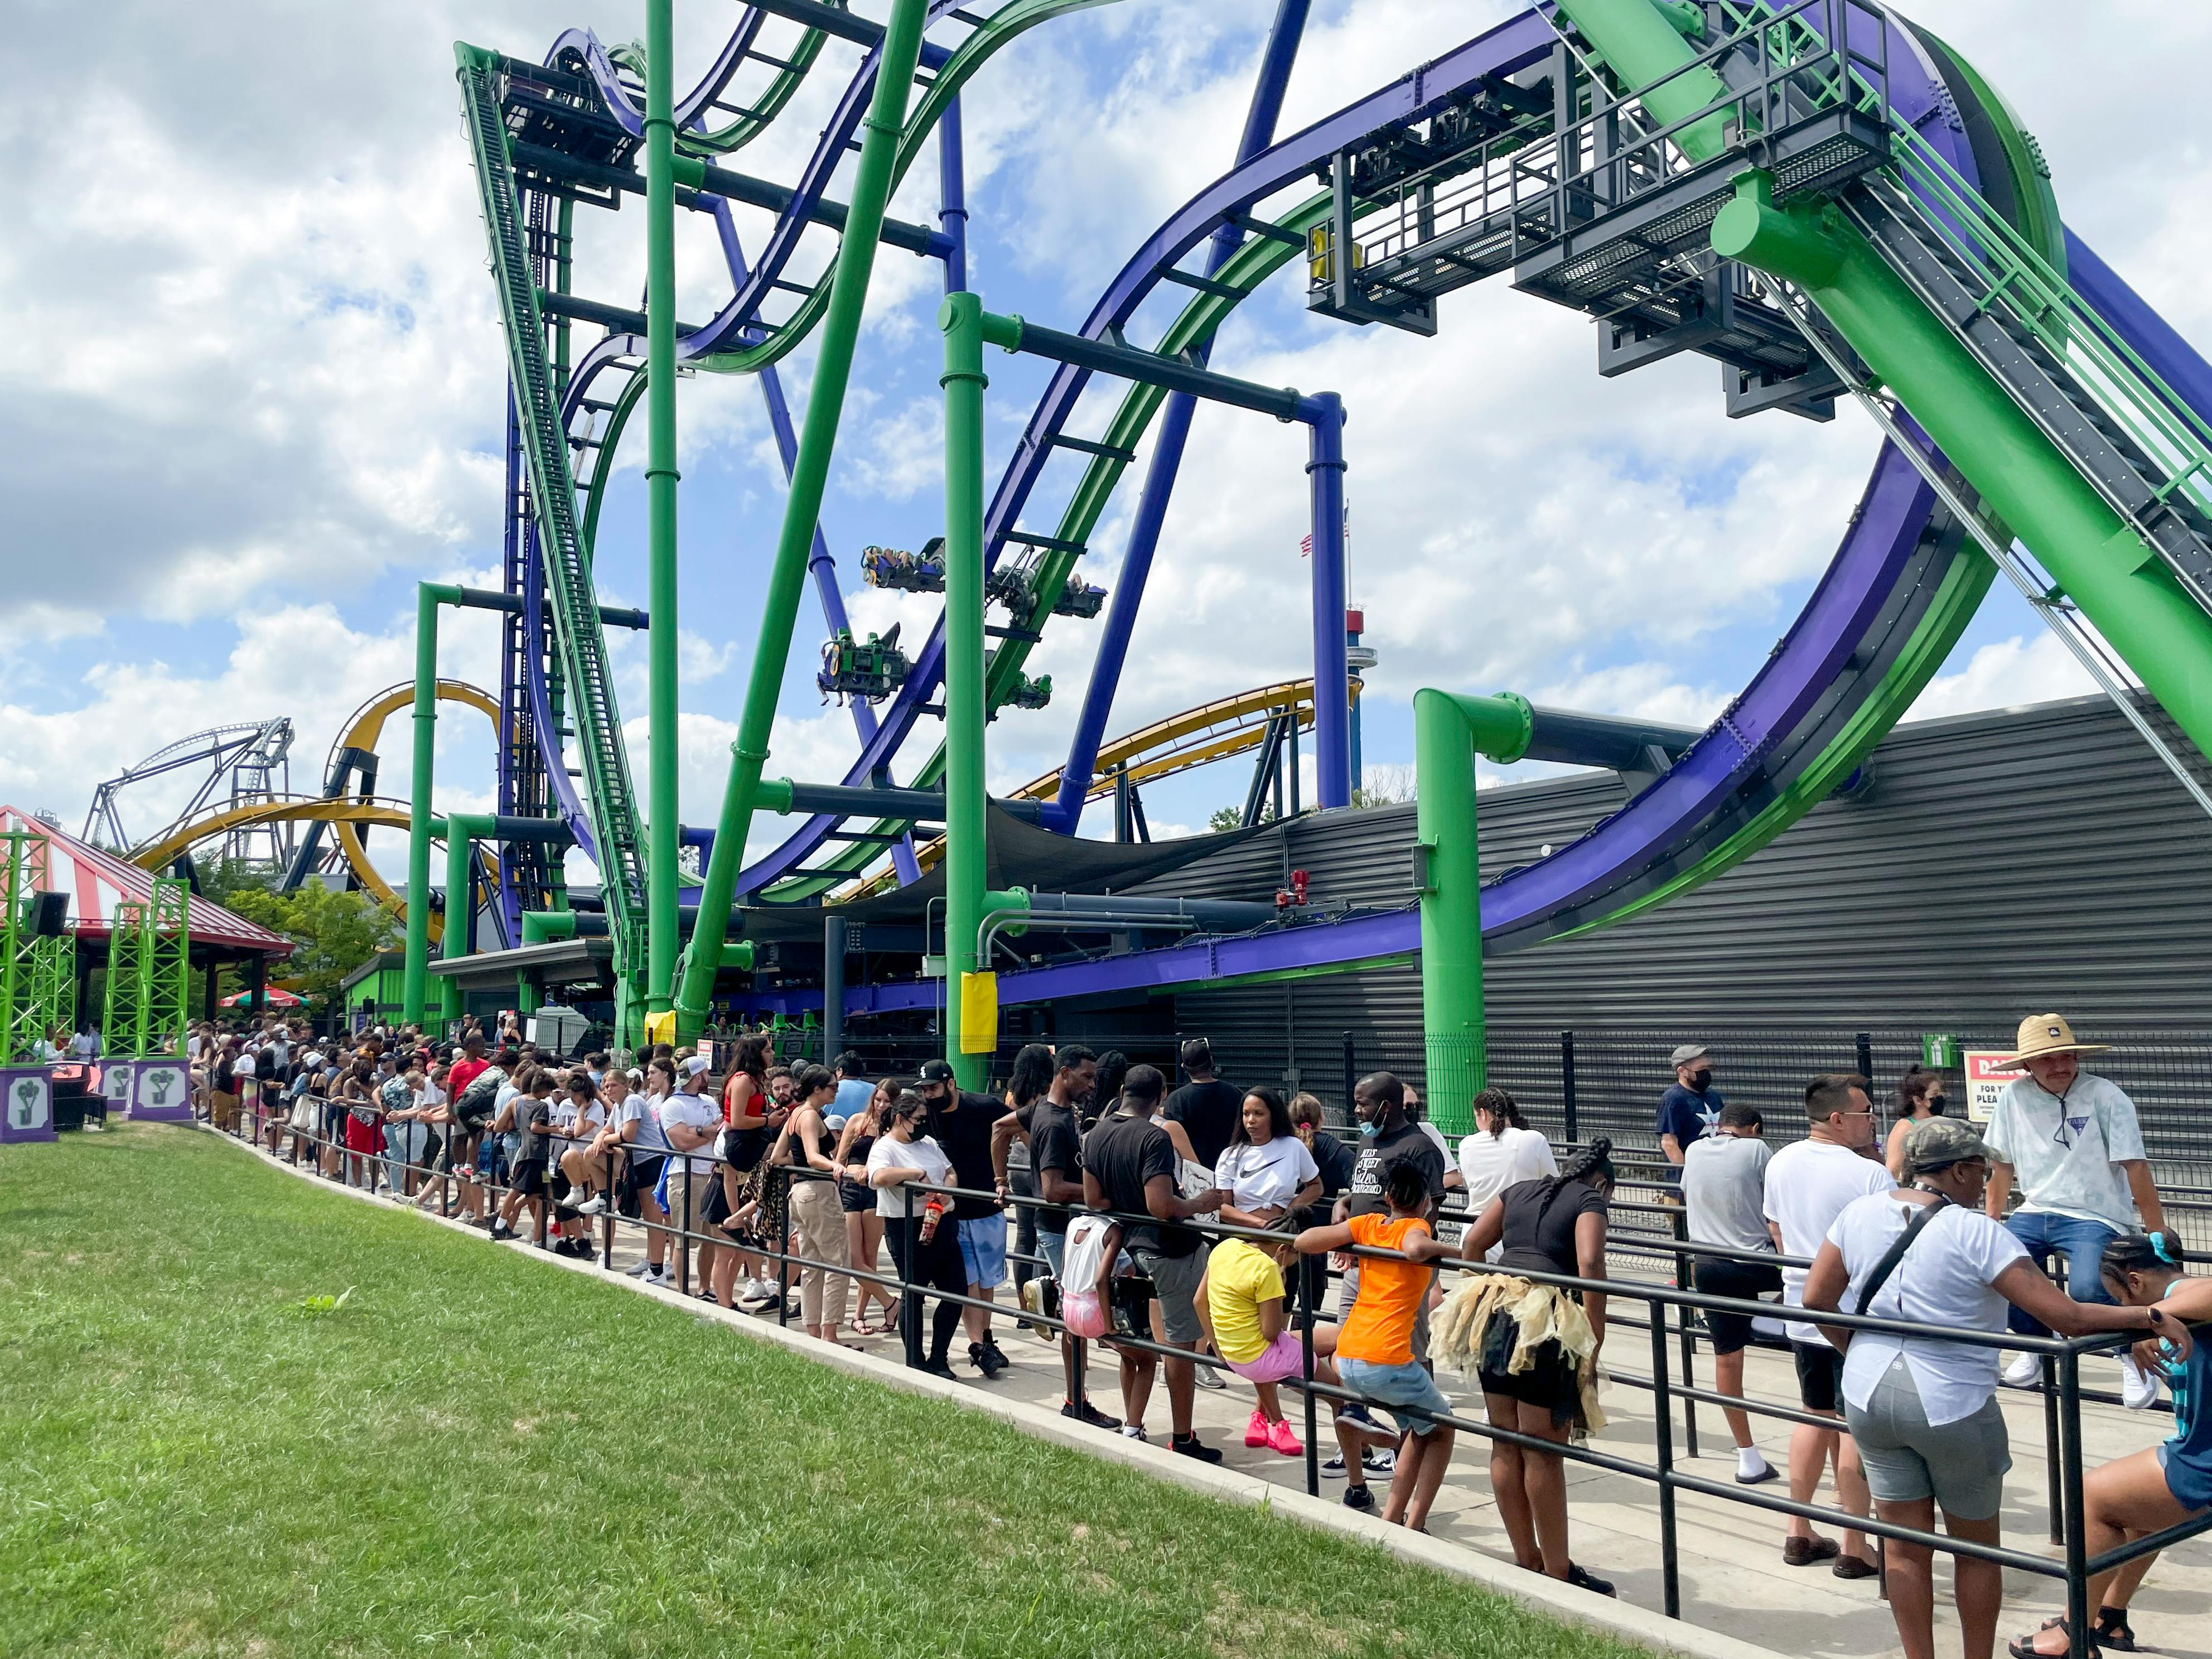 A line of people waiting to ride a roller coaster